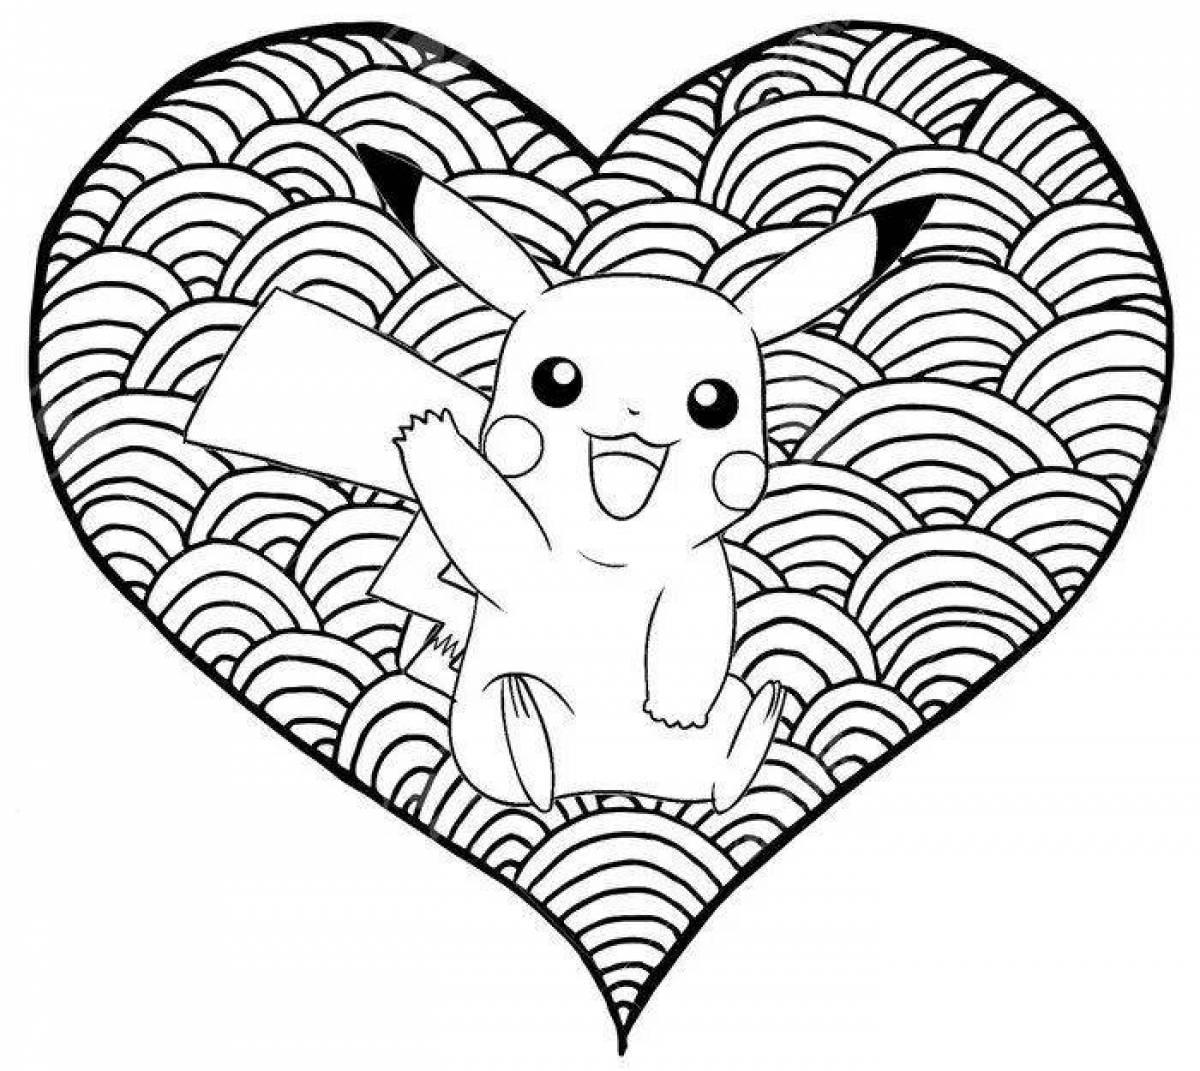 Colorful intricate pikachu coloring book